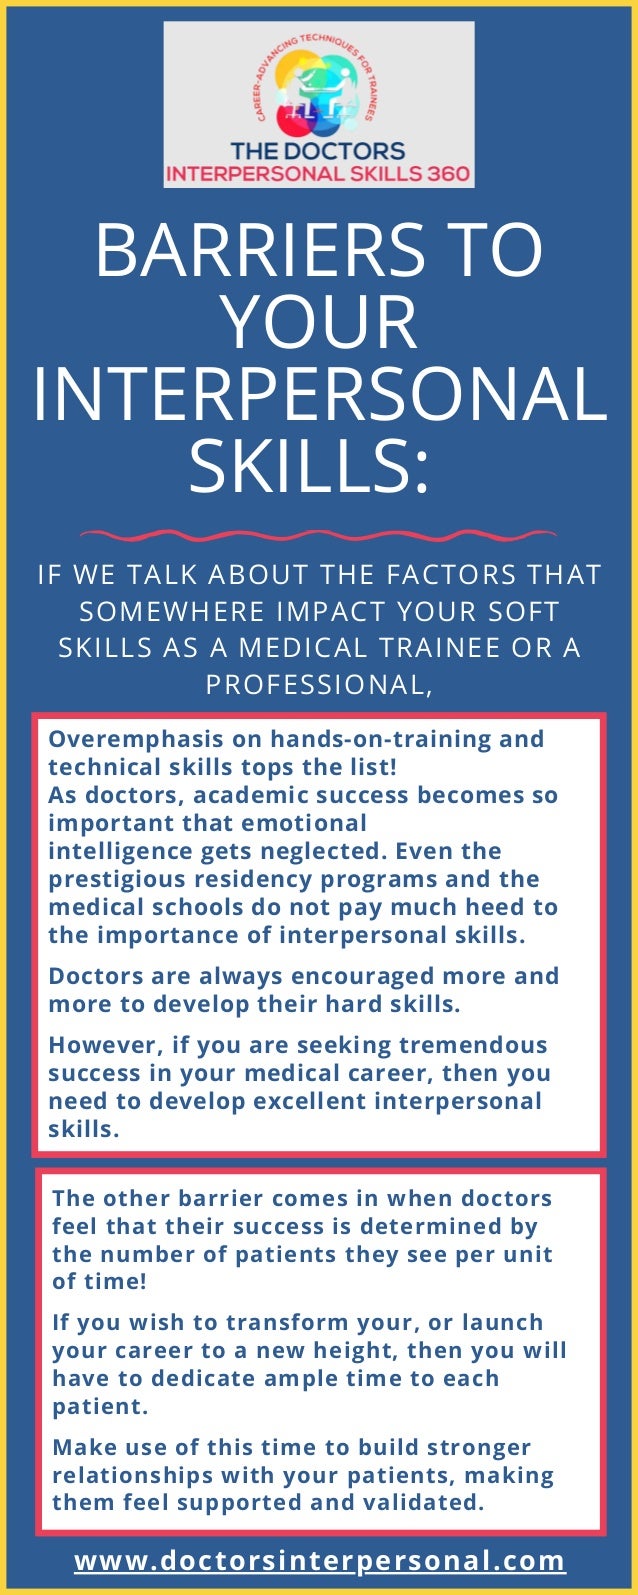 BARRIERS TO
YOUR
INTERPERSONAL
SKILLS:
IF WE TALK ABOUT THE FACTORS THAT
SOMEWHERE IMPACT YOUR SOFT
SKILLS AS A MEDICAL TRAINEE OR A
PROFESSIONAL,
www.doctorsinterpersonal.com
The other barrier comes in when doctors
feel that their success is determined by
the number of patients they see per unit
of time!
If you wish to transform your, or launch
your career to a new height, then you will
have to dedicate ample time to each
patient.
Make use of this time to build stronger
relationships with your patients, making
them feel supported and validated.
Overemphasis on hands-on-training and
technical skills tops the list!
As doctors, academic success becomes so
important that emotional
intelligence gets neglected. Even the
prestigious residency programs and the
medical schools do not pay much heed to
the importance of interpersonal skills.
Doctors are always encouraged more and
more to develop their hard skills.
However, if you are seeking tremendous
success in your medical career, then you
need to develop excellent interpersonal
skills.
 